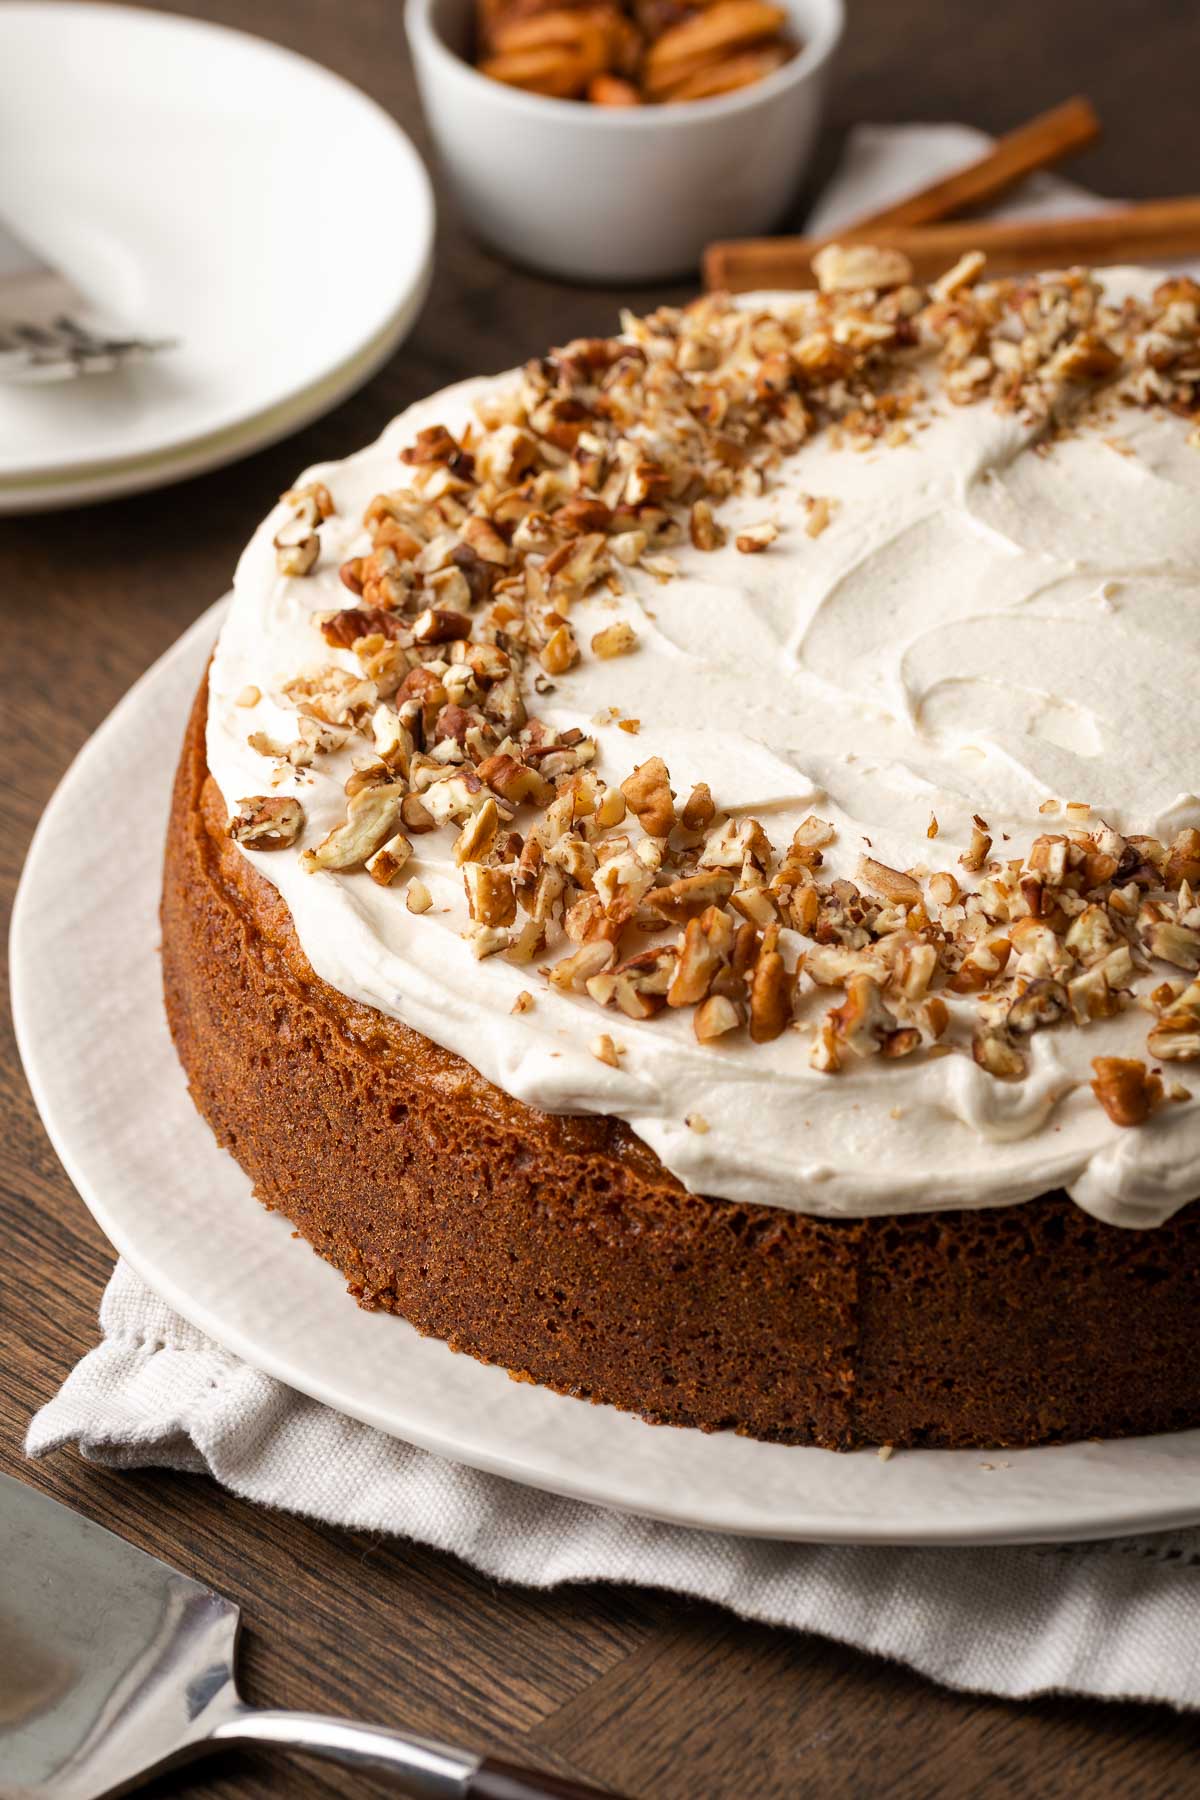 Round carrot cake with cream cheese frosting and a chopped walnut border.